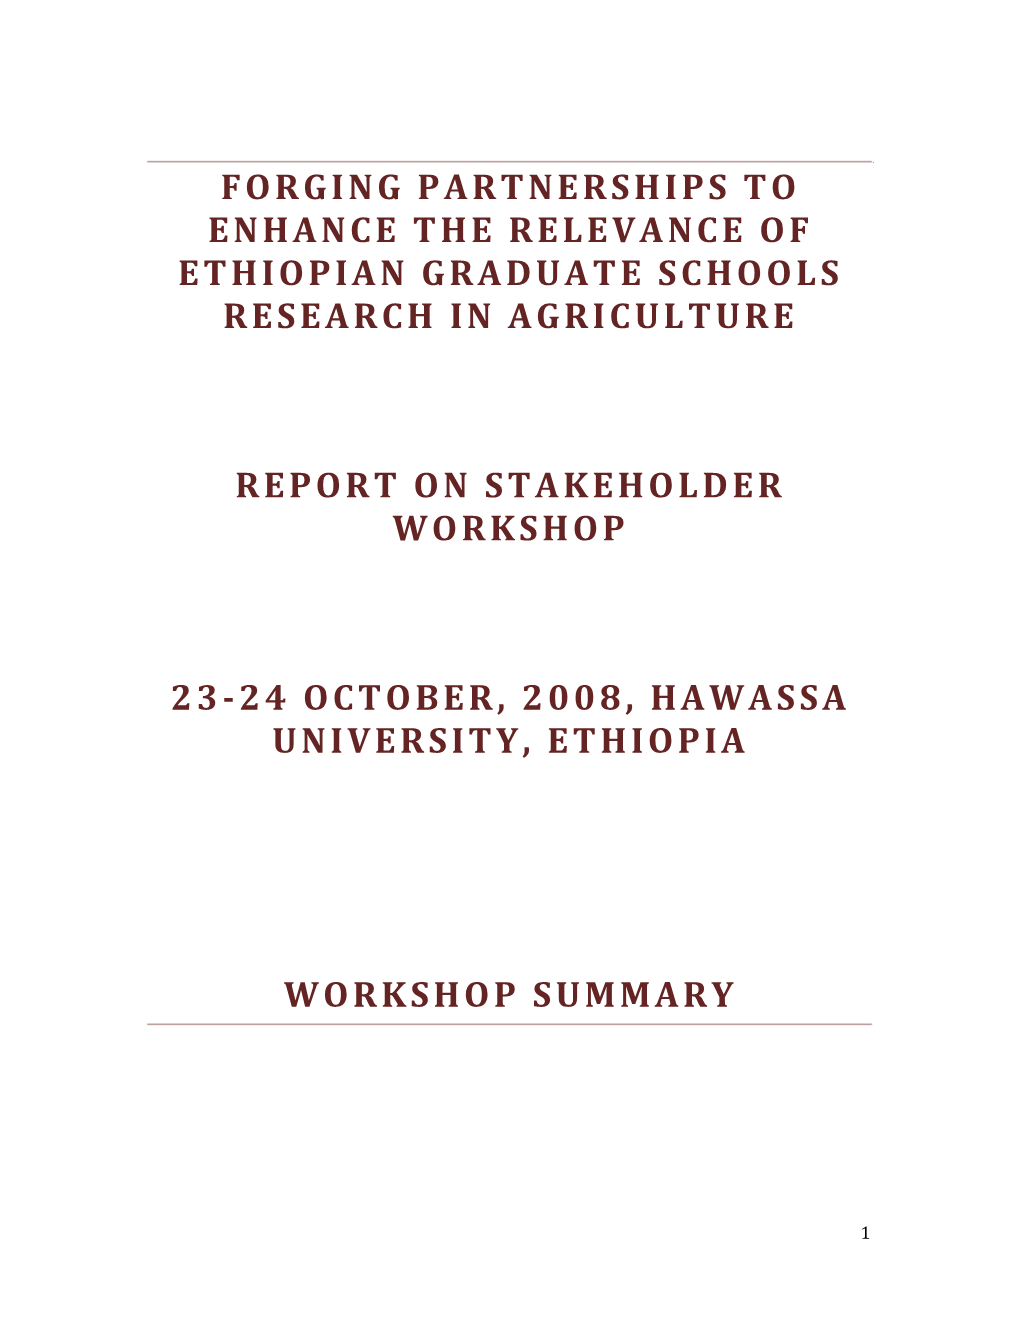 Forging Partnerships to Enhance the Relevance of Ethiopian Graduate Schools Research in Agriculture